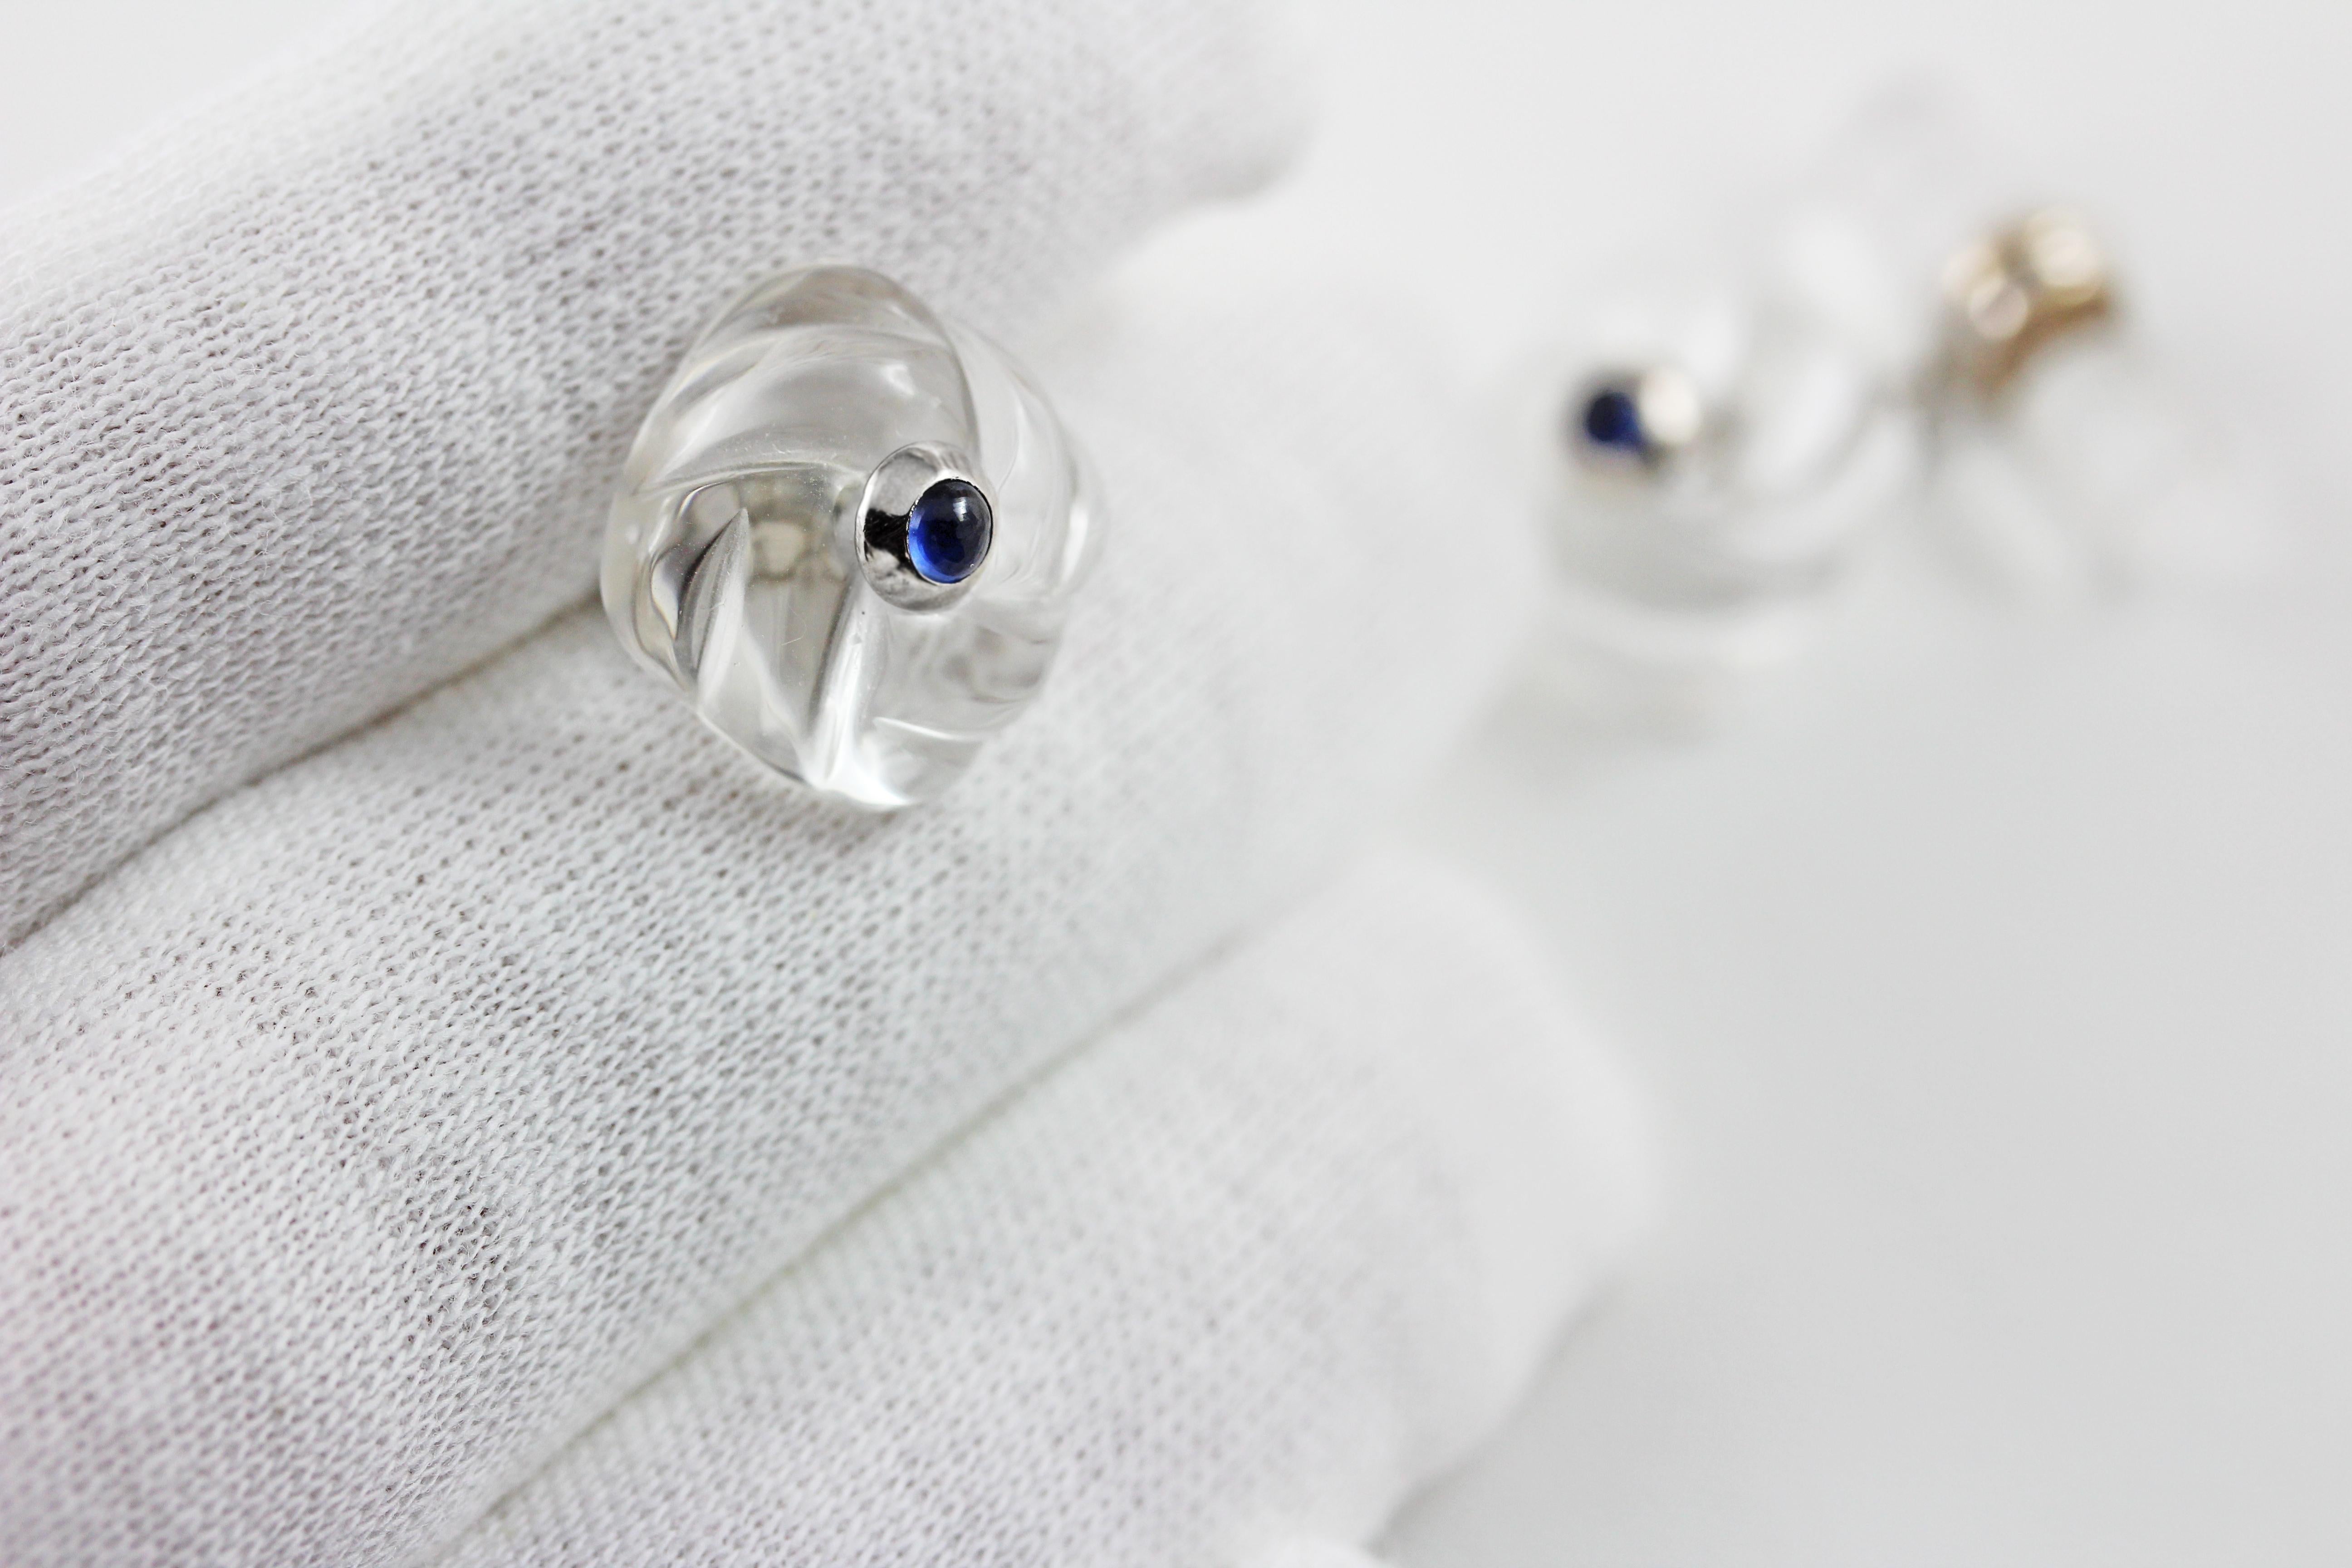 Cabochon 18 Karat White Gold Interwoven Square Rock Crystal and Sapphires Cufflinks